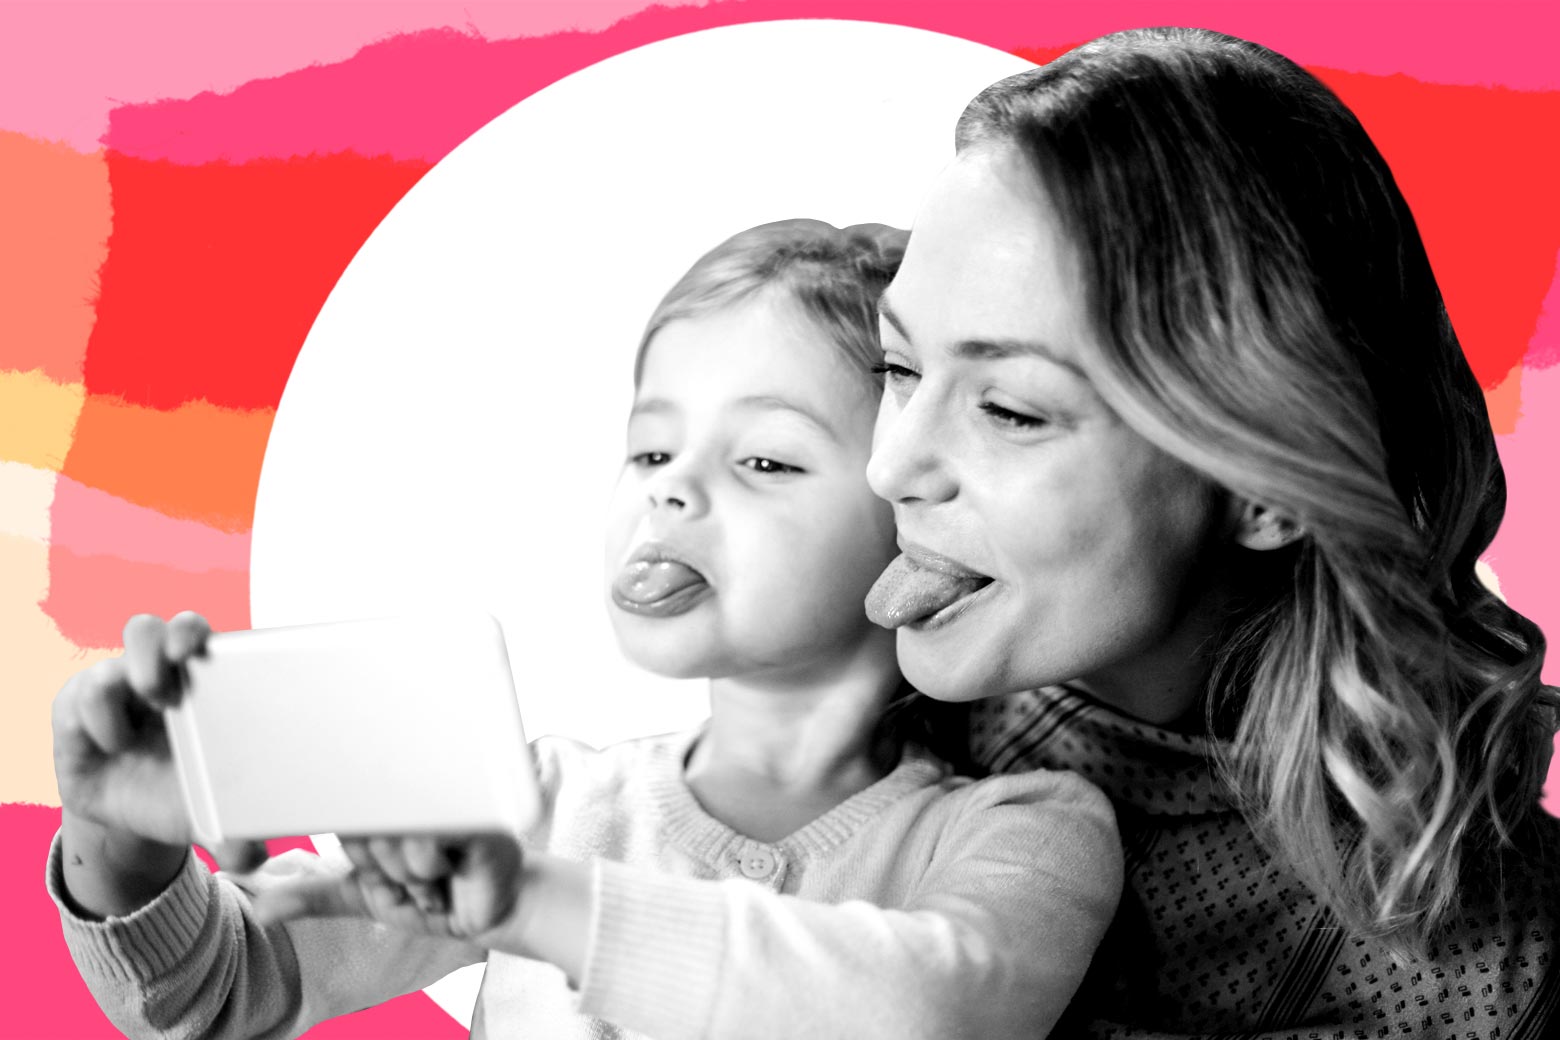 Mother and daughter taking a selfie together while sticking out their tongues